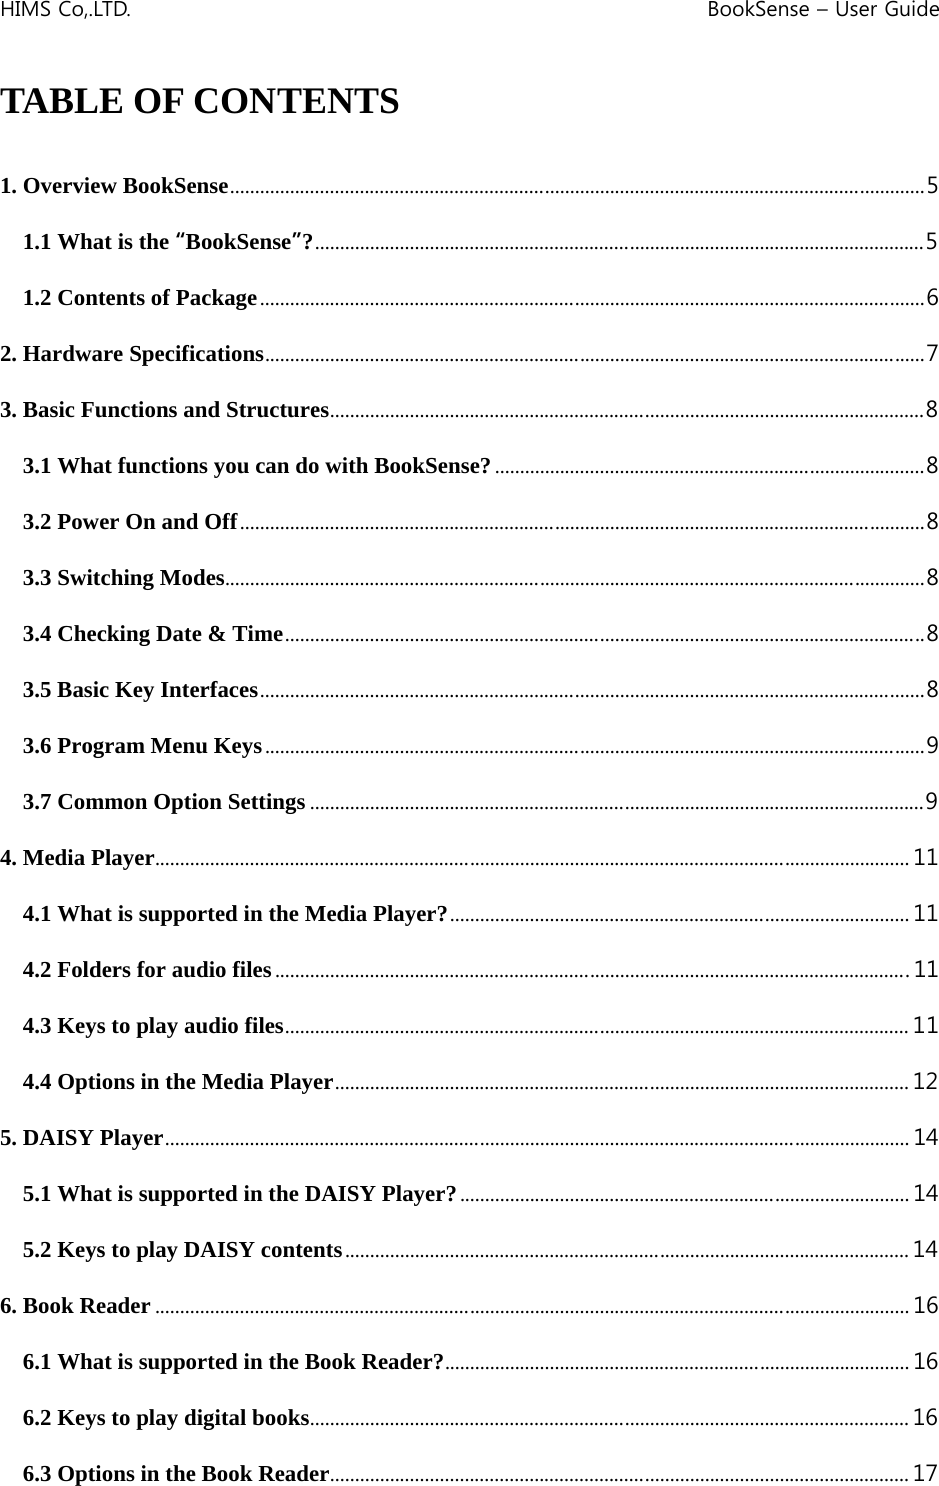 HIMS Co,.LTD.    BookSense – User Guide    TABLE OF CONTENTS  1. Overview BookSense...........................................................................................................................................5 1.1 What is the “BookSense”?..........................................................................................................................5 1.2 Contents of Package.....................................................................................................................................6 2. Hardware Specifications....................................................................................................................................7 3. Basic Functions and Structures.......................................................................................................................8 3.1 What functions you can do with BookSense?......................................................................................8 3.2 Power On and Off.........................................................................................................................................8 3.3 Switching Modes............................................................................................................................................8 3.4 Checking Date &amp; Time................................................................................................................................8 3.5 Basic Key Interfaces.....................................................................................................................................8 3.6 Program Menu Keys....................................................................................................................................9 3.7 Common Option Settings ...........................................................................................................................9 4. Media Player....................................................................................................................................................... 11 4.1 What is supported in the Media Player?............................................................................................ 11 4.2 Folders for audio files...............................................................................................................................11 4.3 Keys to play audio files............................................................................................................................. 11 4.4 Options in the Media Player................................................................................................................... 12 5. DAISY Player..................................................................................................................................................... 14 5.1 What is supported in the DAISY Player?.......................................................................................... 14 5.2 Keys to play DAISY contents................................................................................................................. 14 6. Book Reader ....................................................................................................................................................... 16 6.1 What is supported in the Book Reader?............................................................................................. 16 6.2 Keys to play digital books........................................................................................................................ 16 6.3 Options in the Book Reader.................................................................................................................... 17 